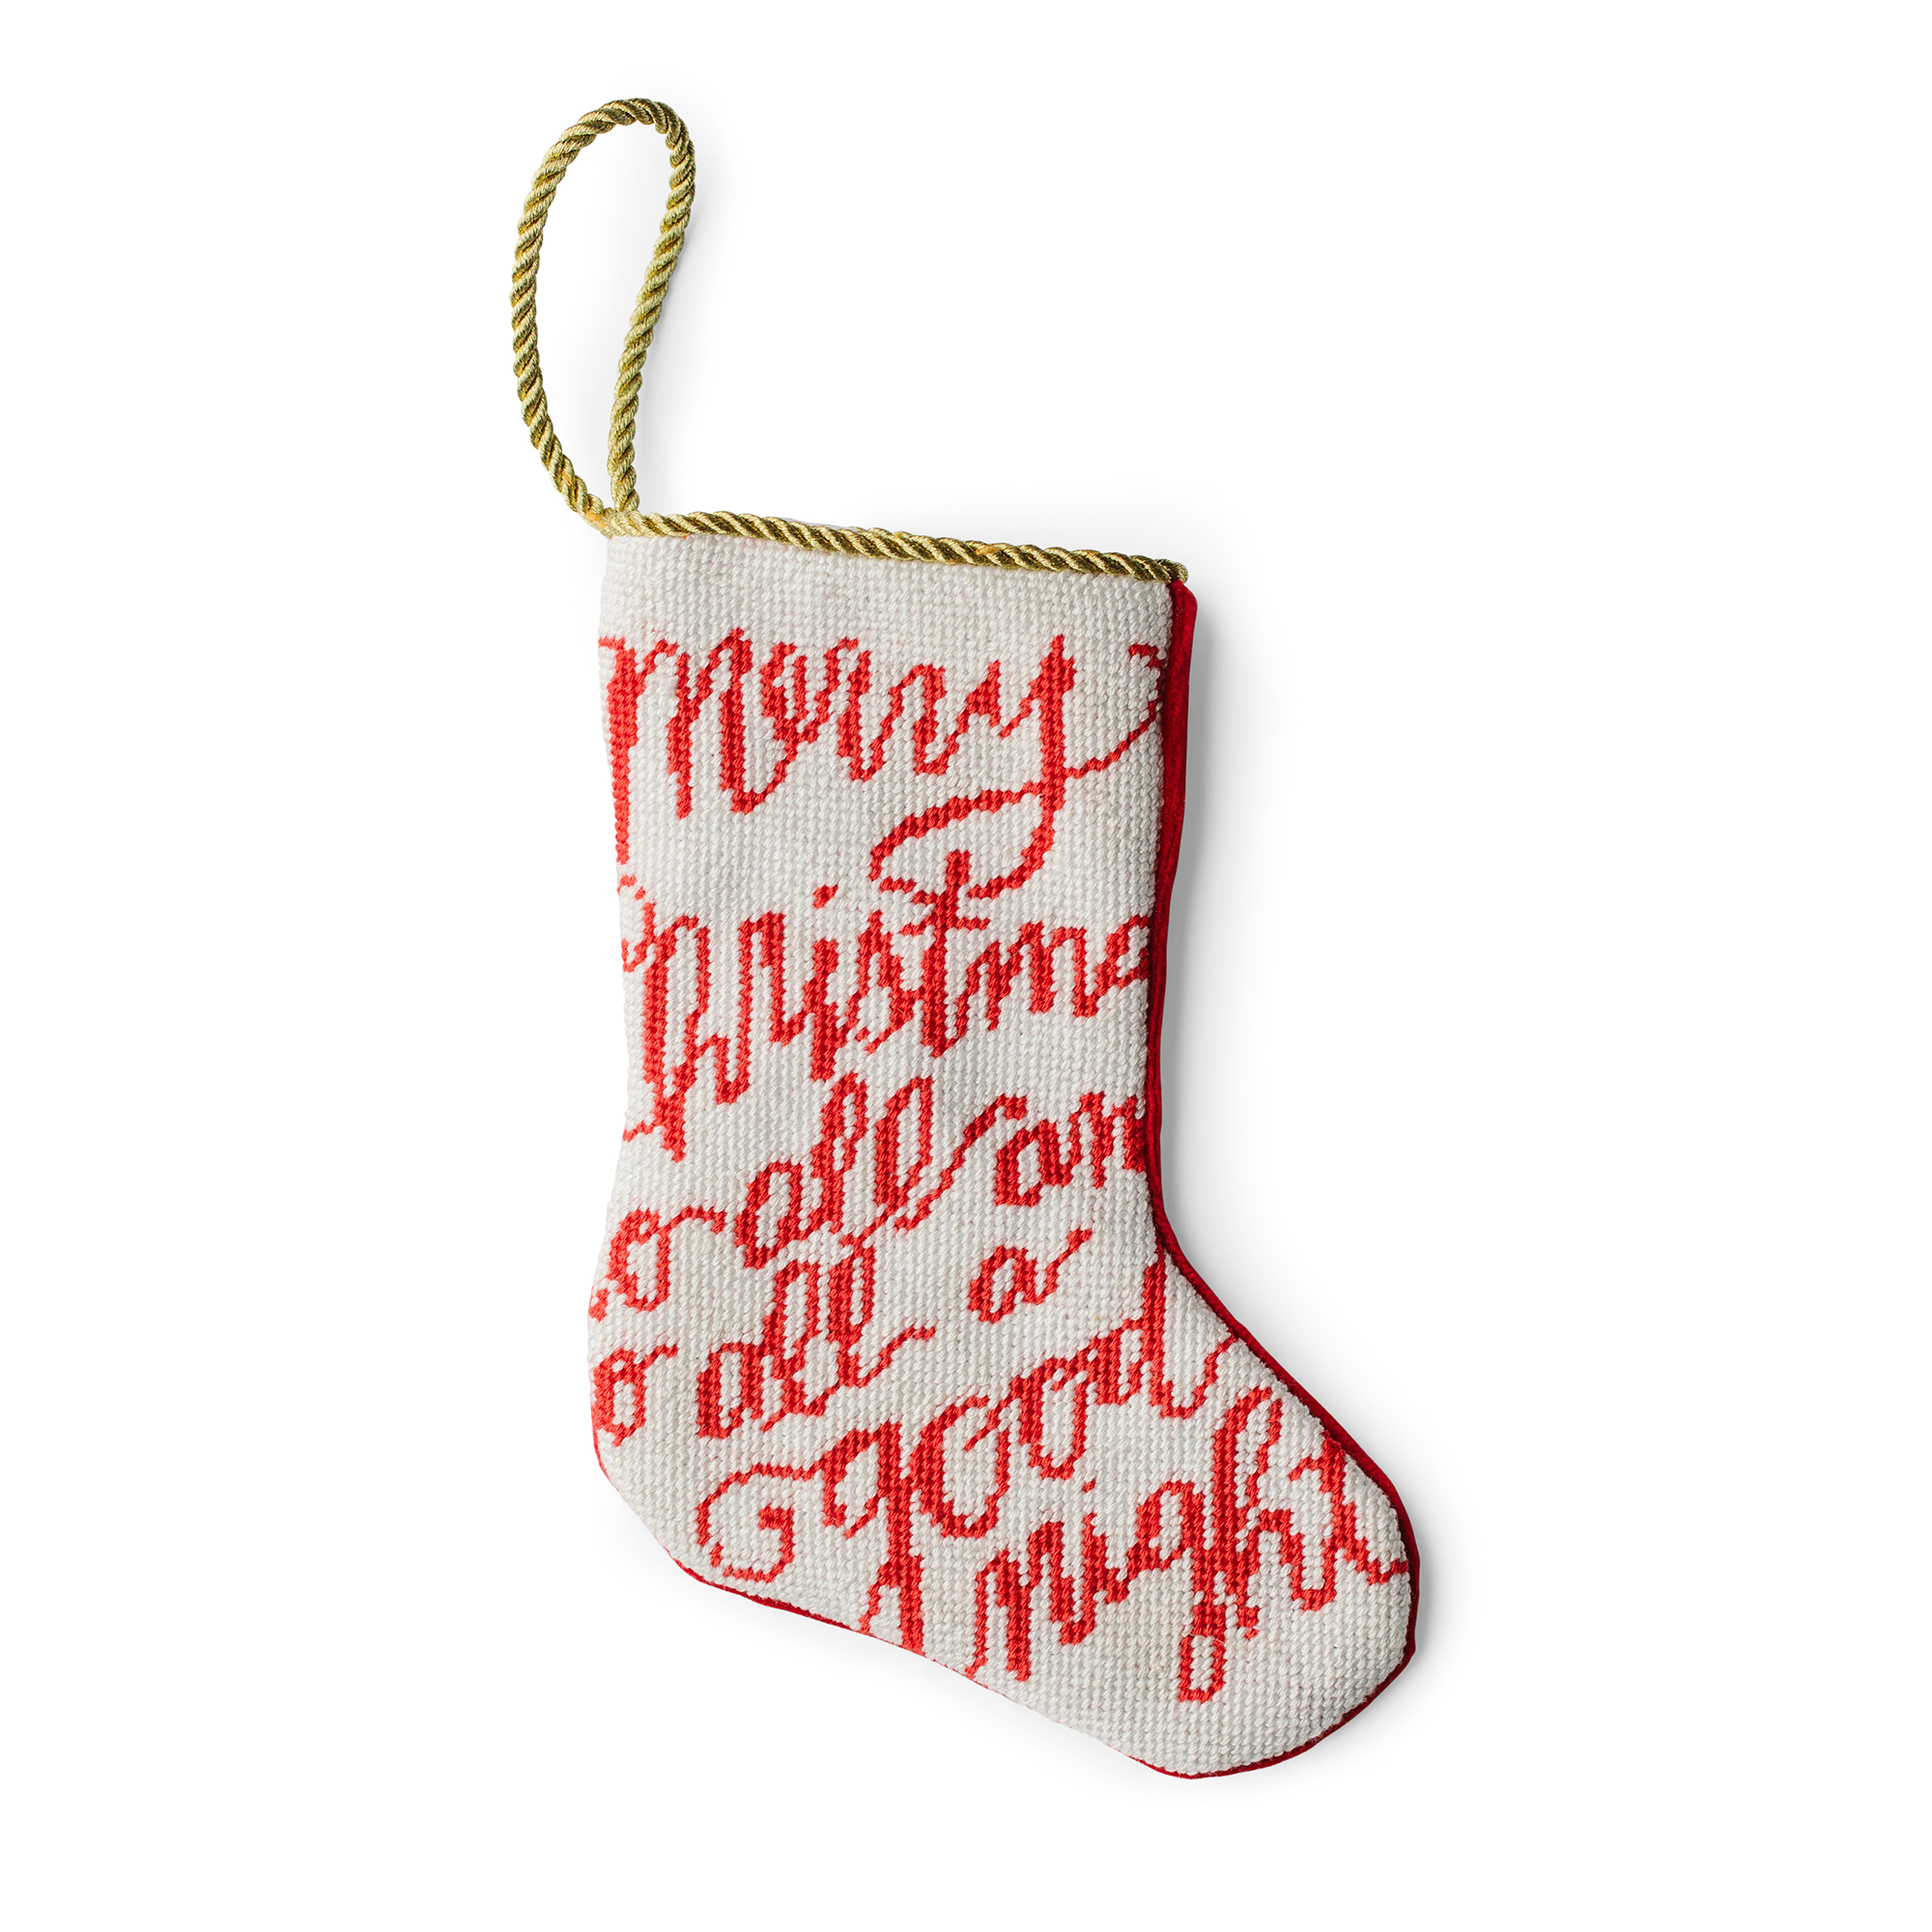 A small, intricately designed needlepoint stocking featuring the words 'Merry Christmas to all and to all a good night' in red letters against a white background. A gold loop at the top makes it perfect as a tree ornament, place setting, or for hanging by the fireplace.